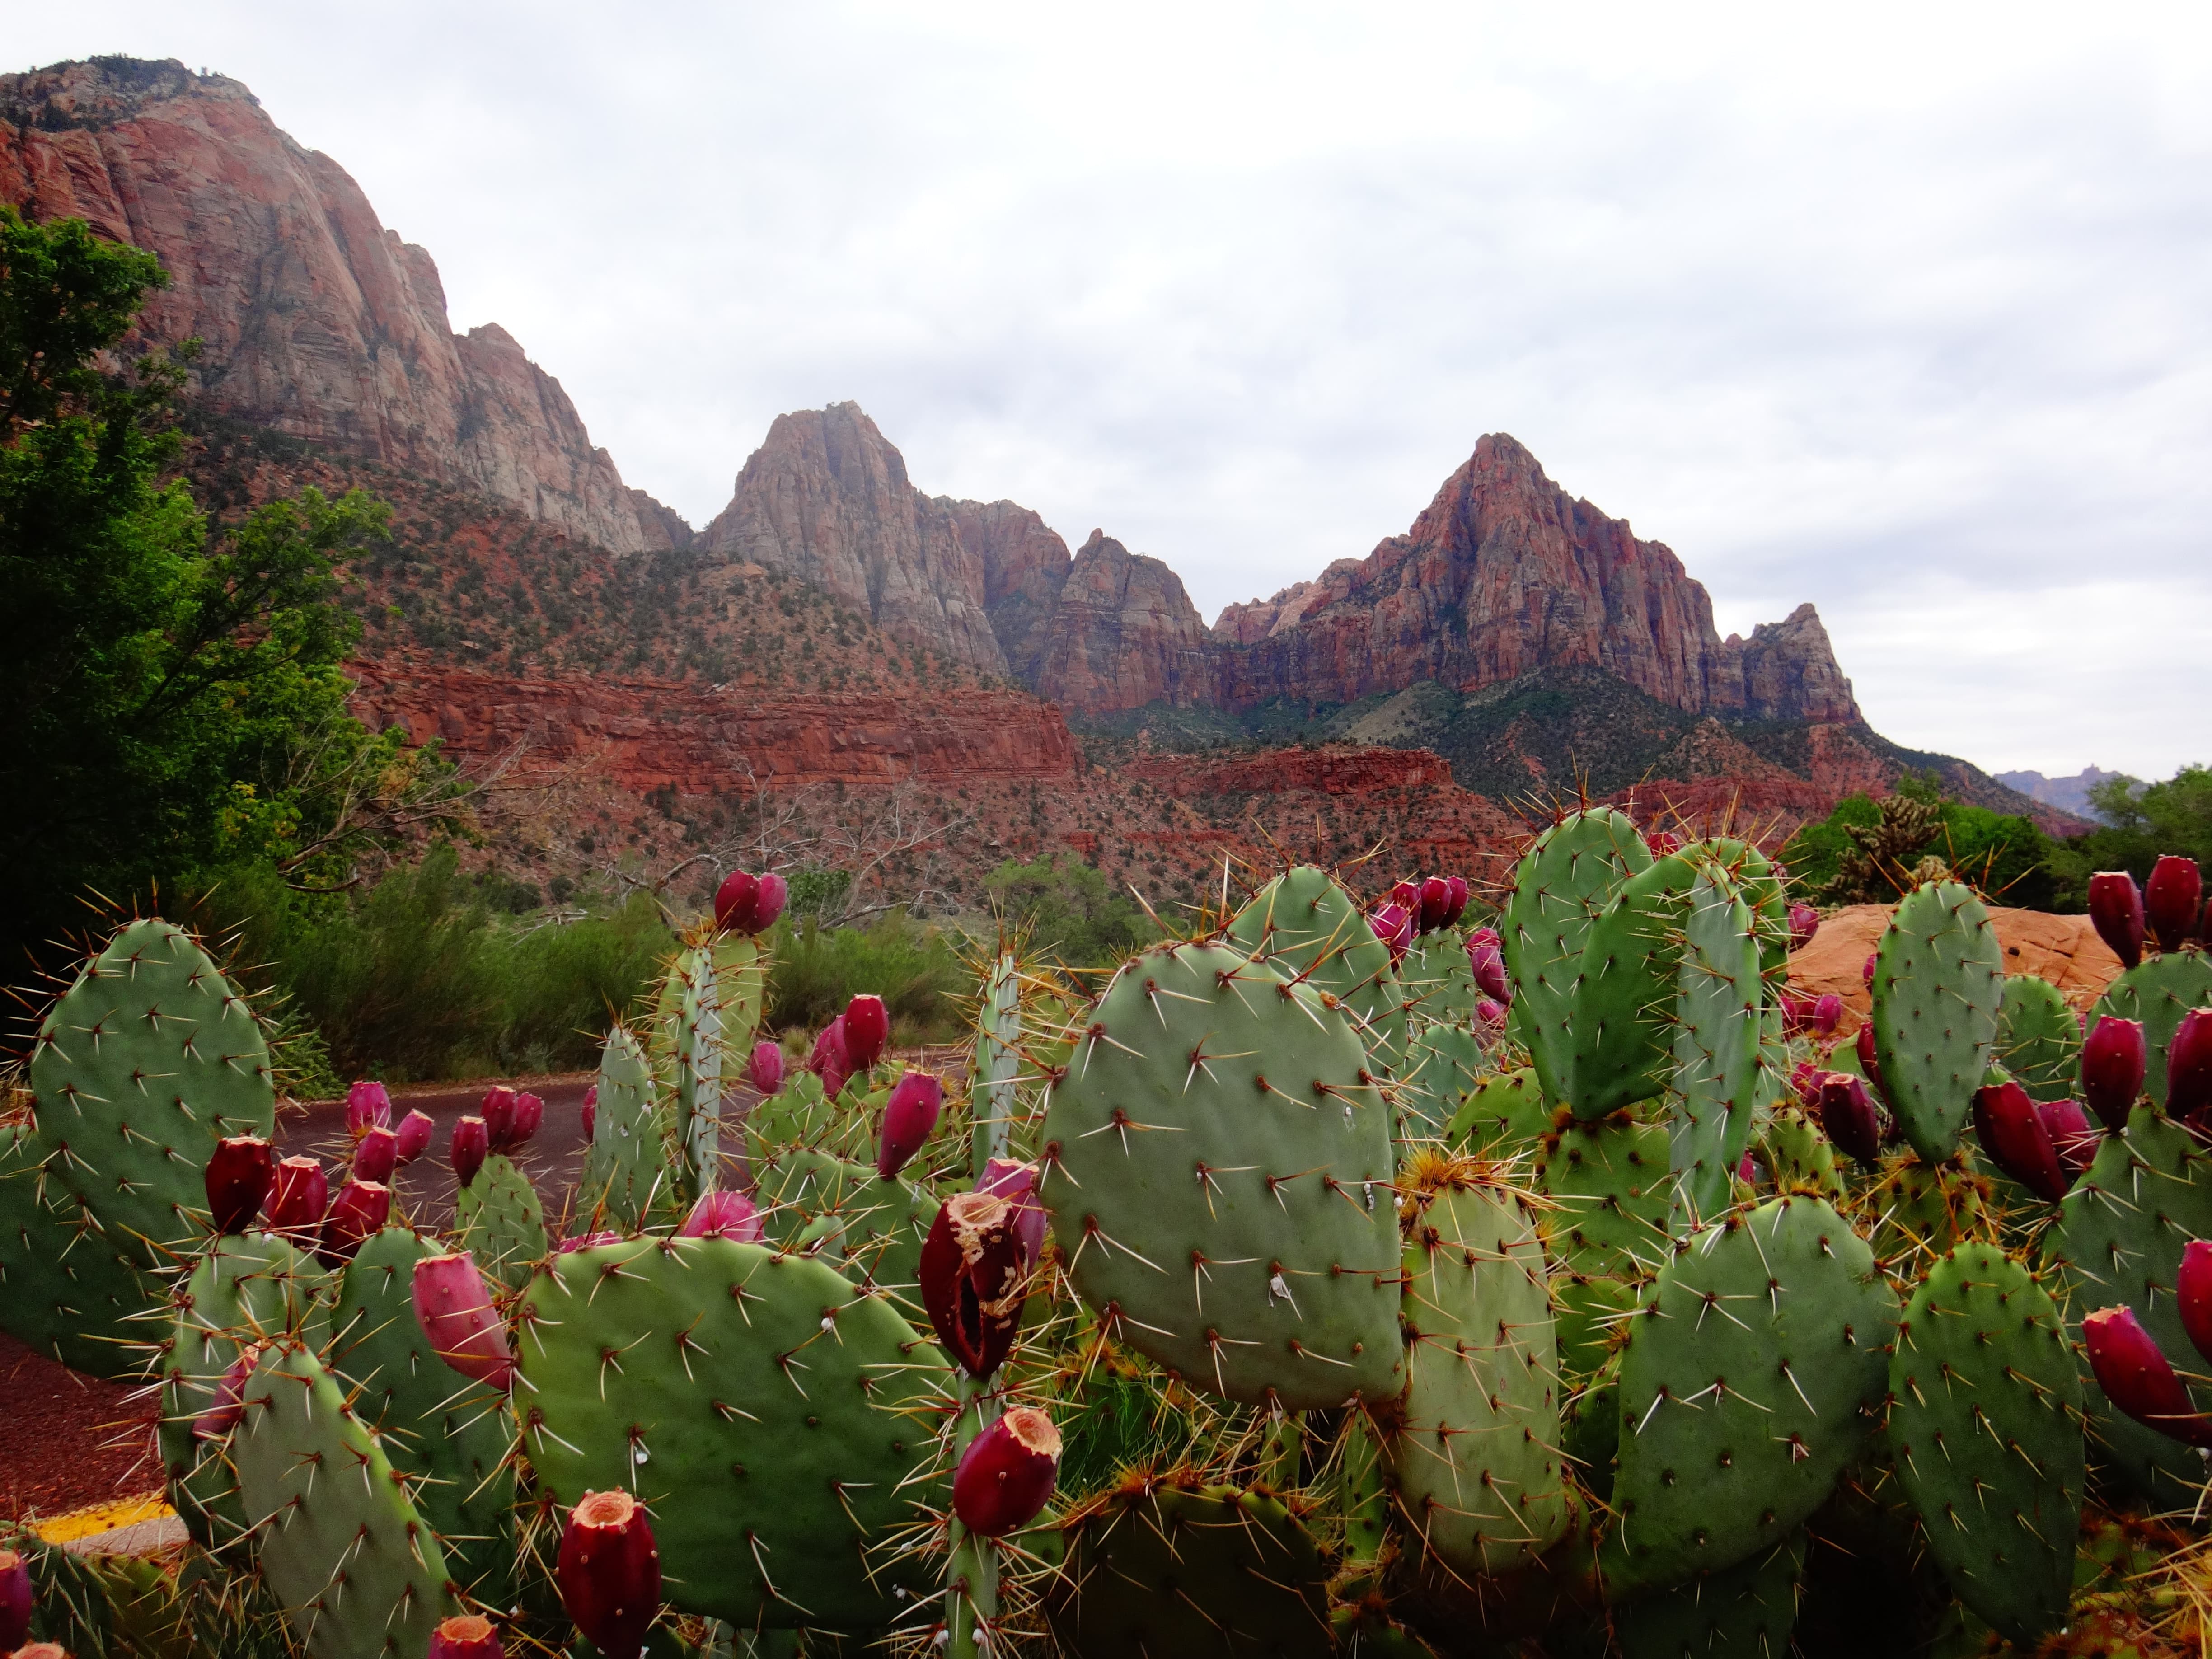 Pictures of mountains and cactuses